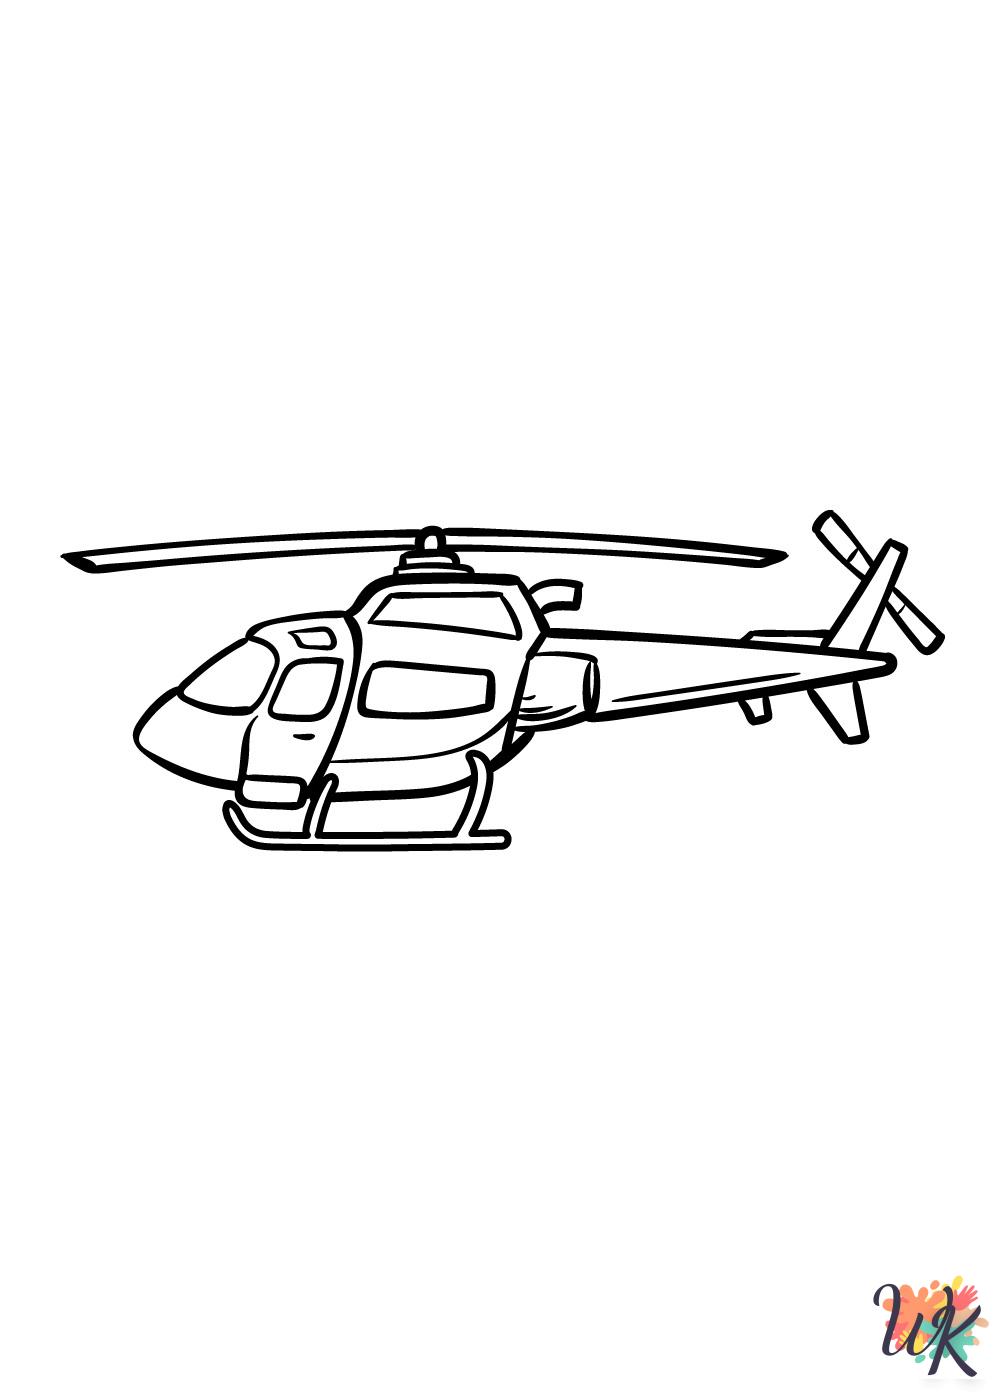 Helicopter coloring pages pdf